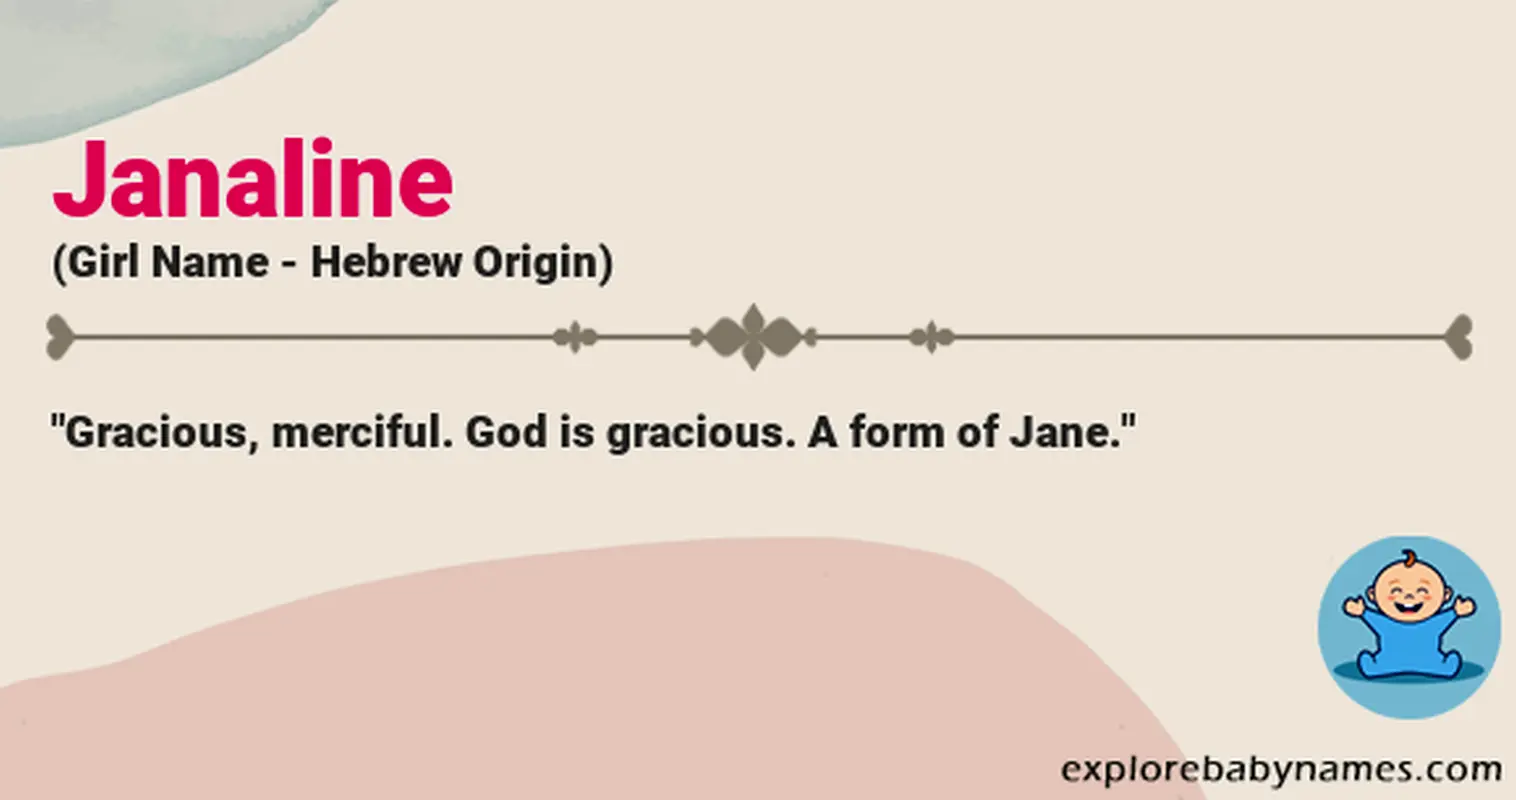 Meaning of Janaline